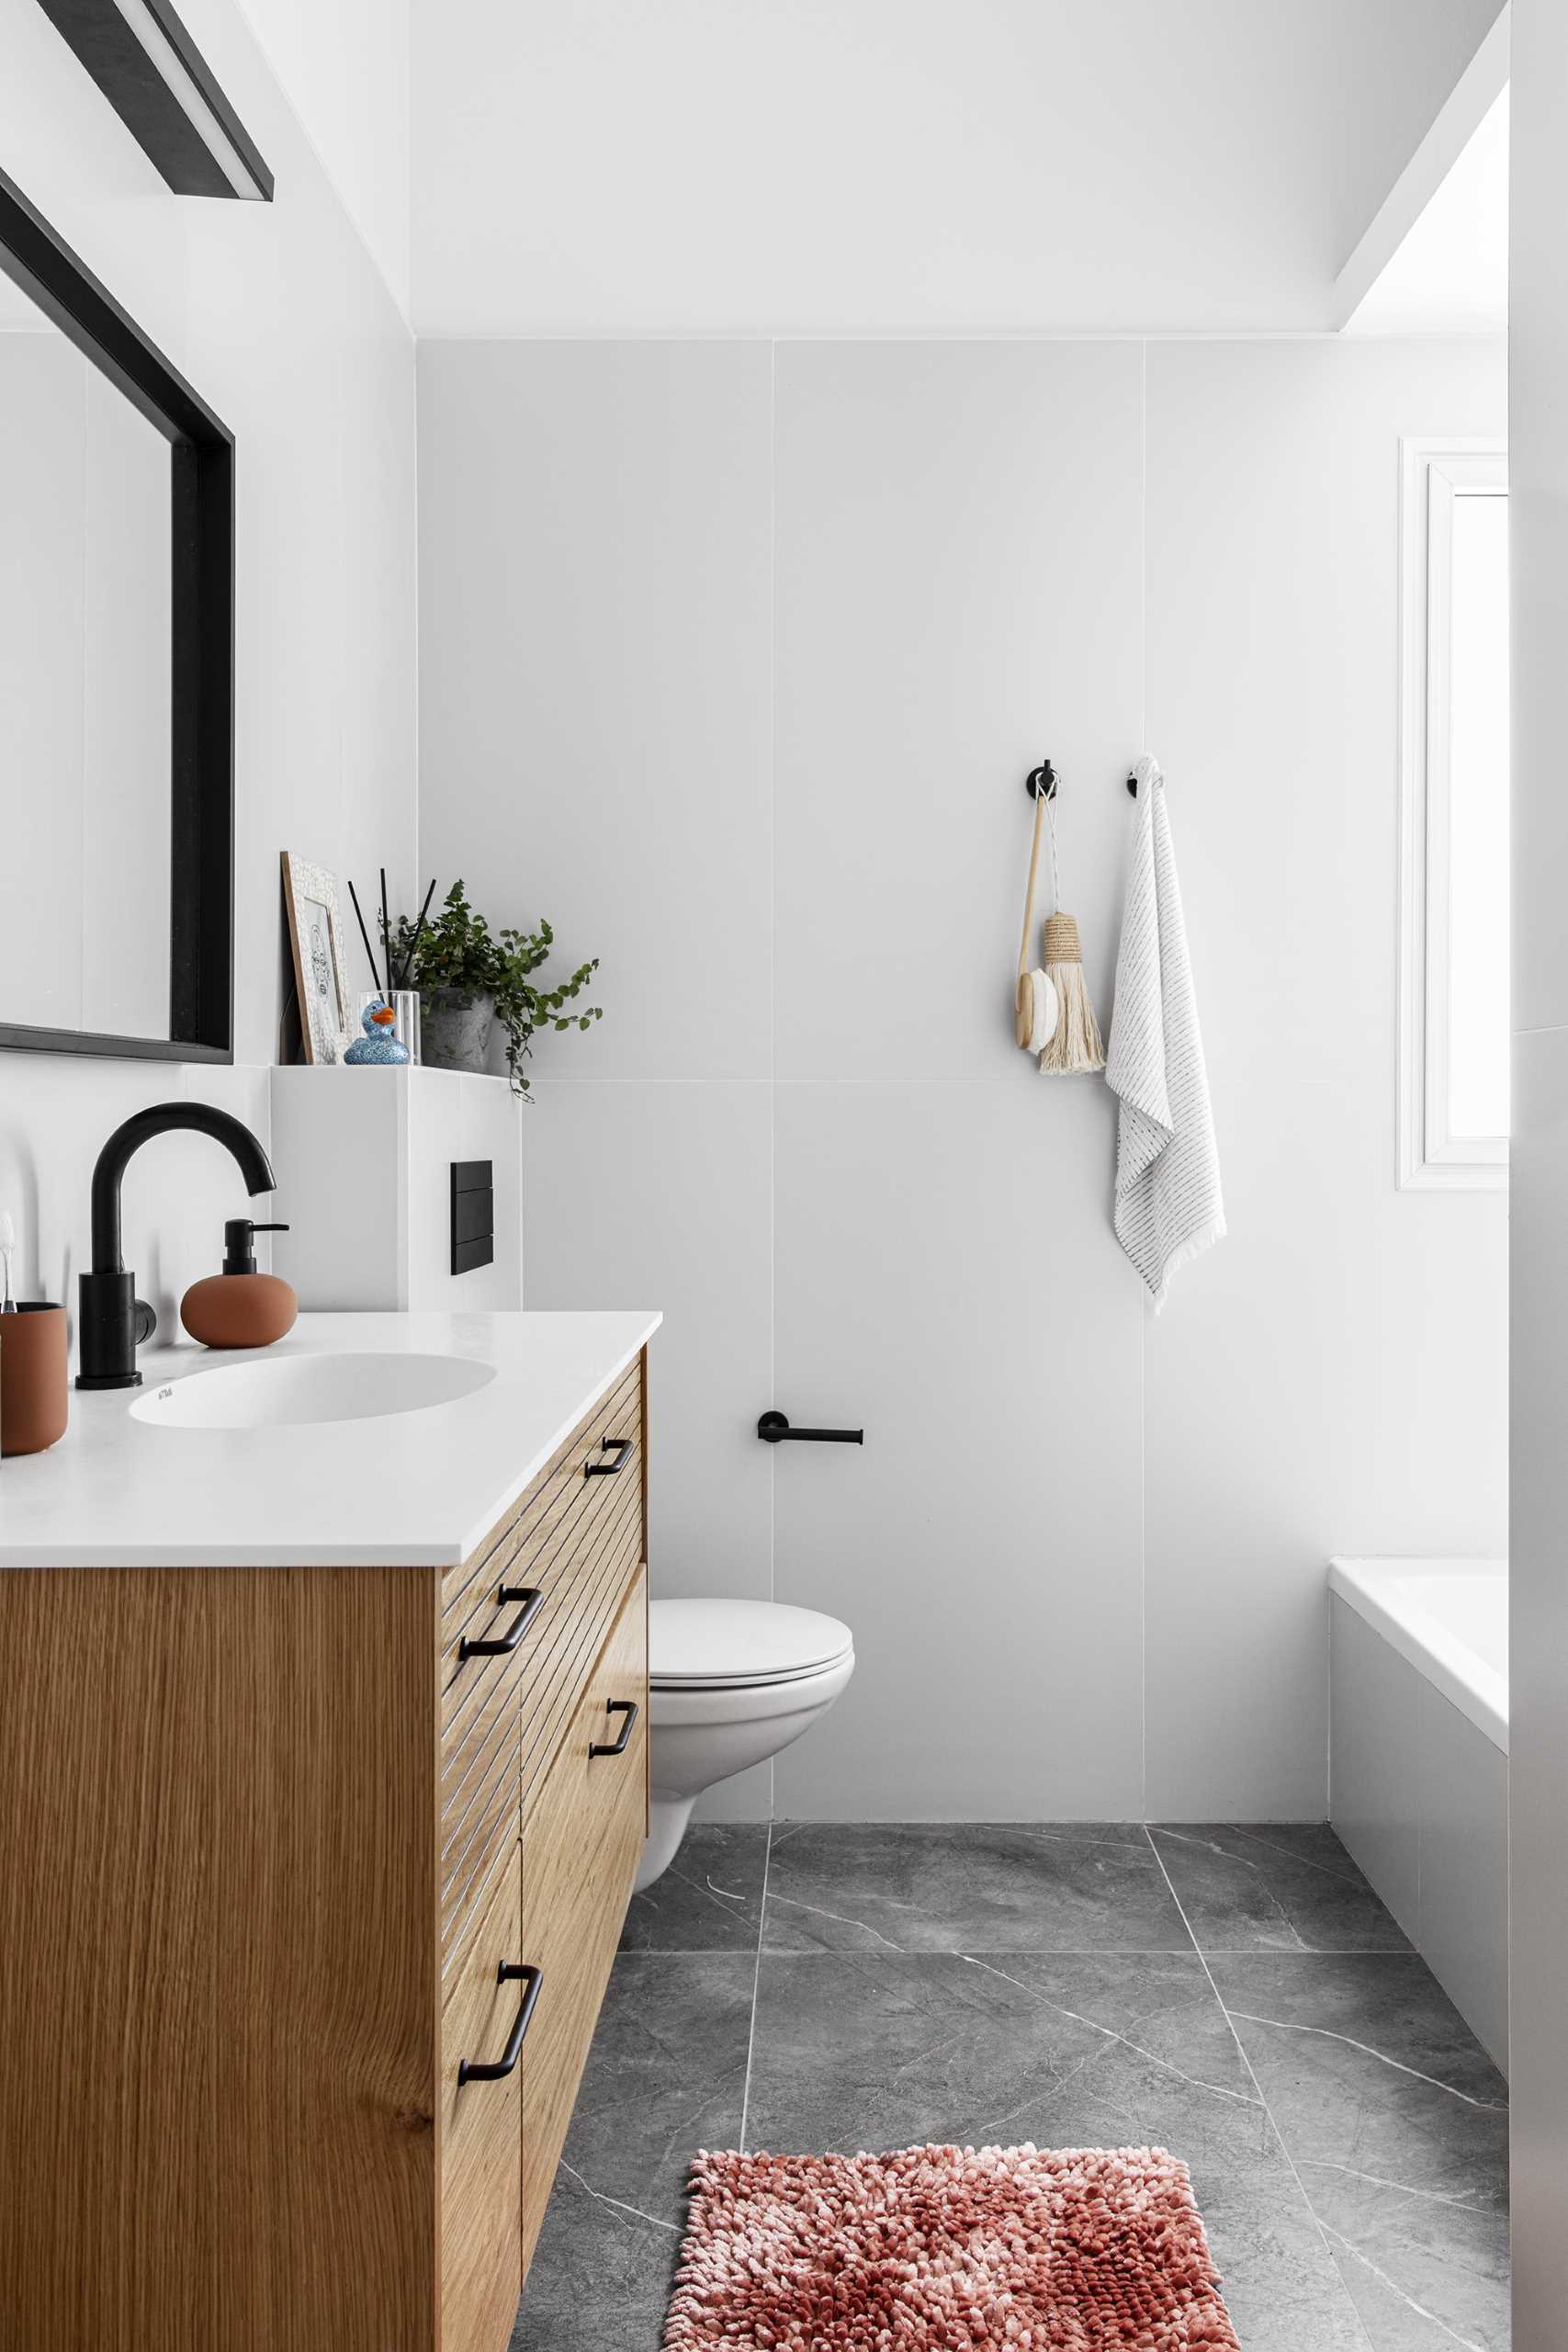 In this modern bathroom, there's a floating wood vanity, a black-framed-square mirror, a pair of wall hooks, large format tiles, and a bath/shower combo. Hidden from view are the laundry machines.